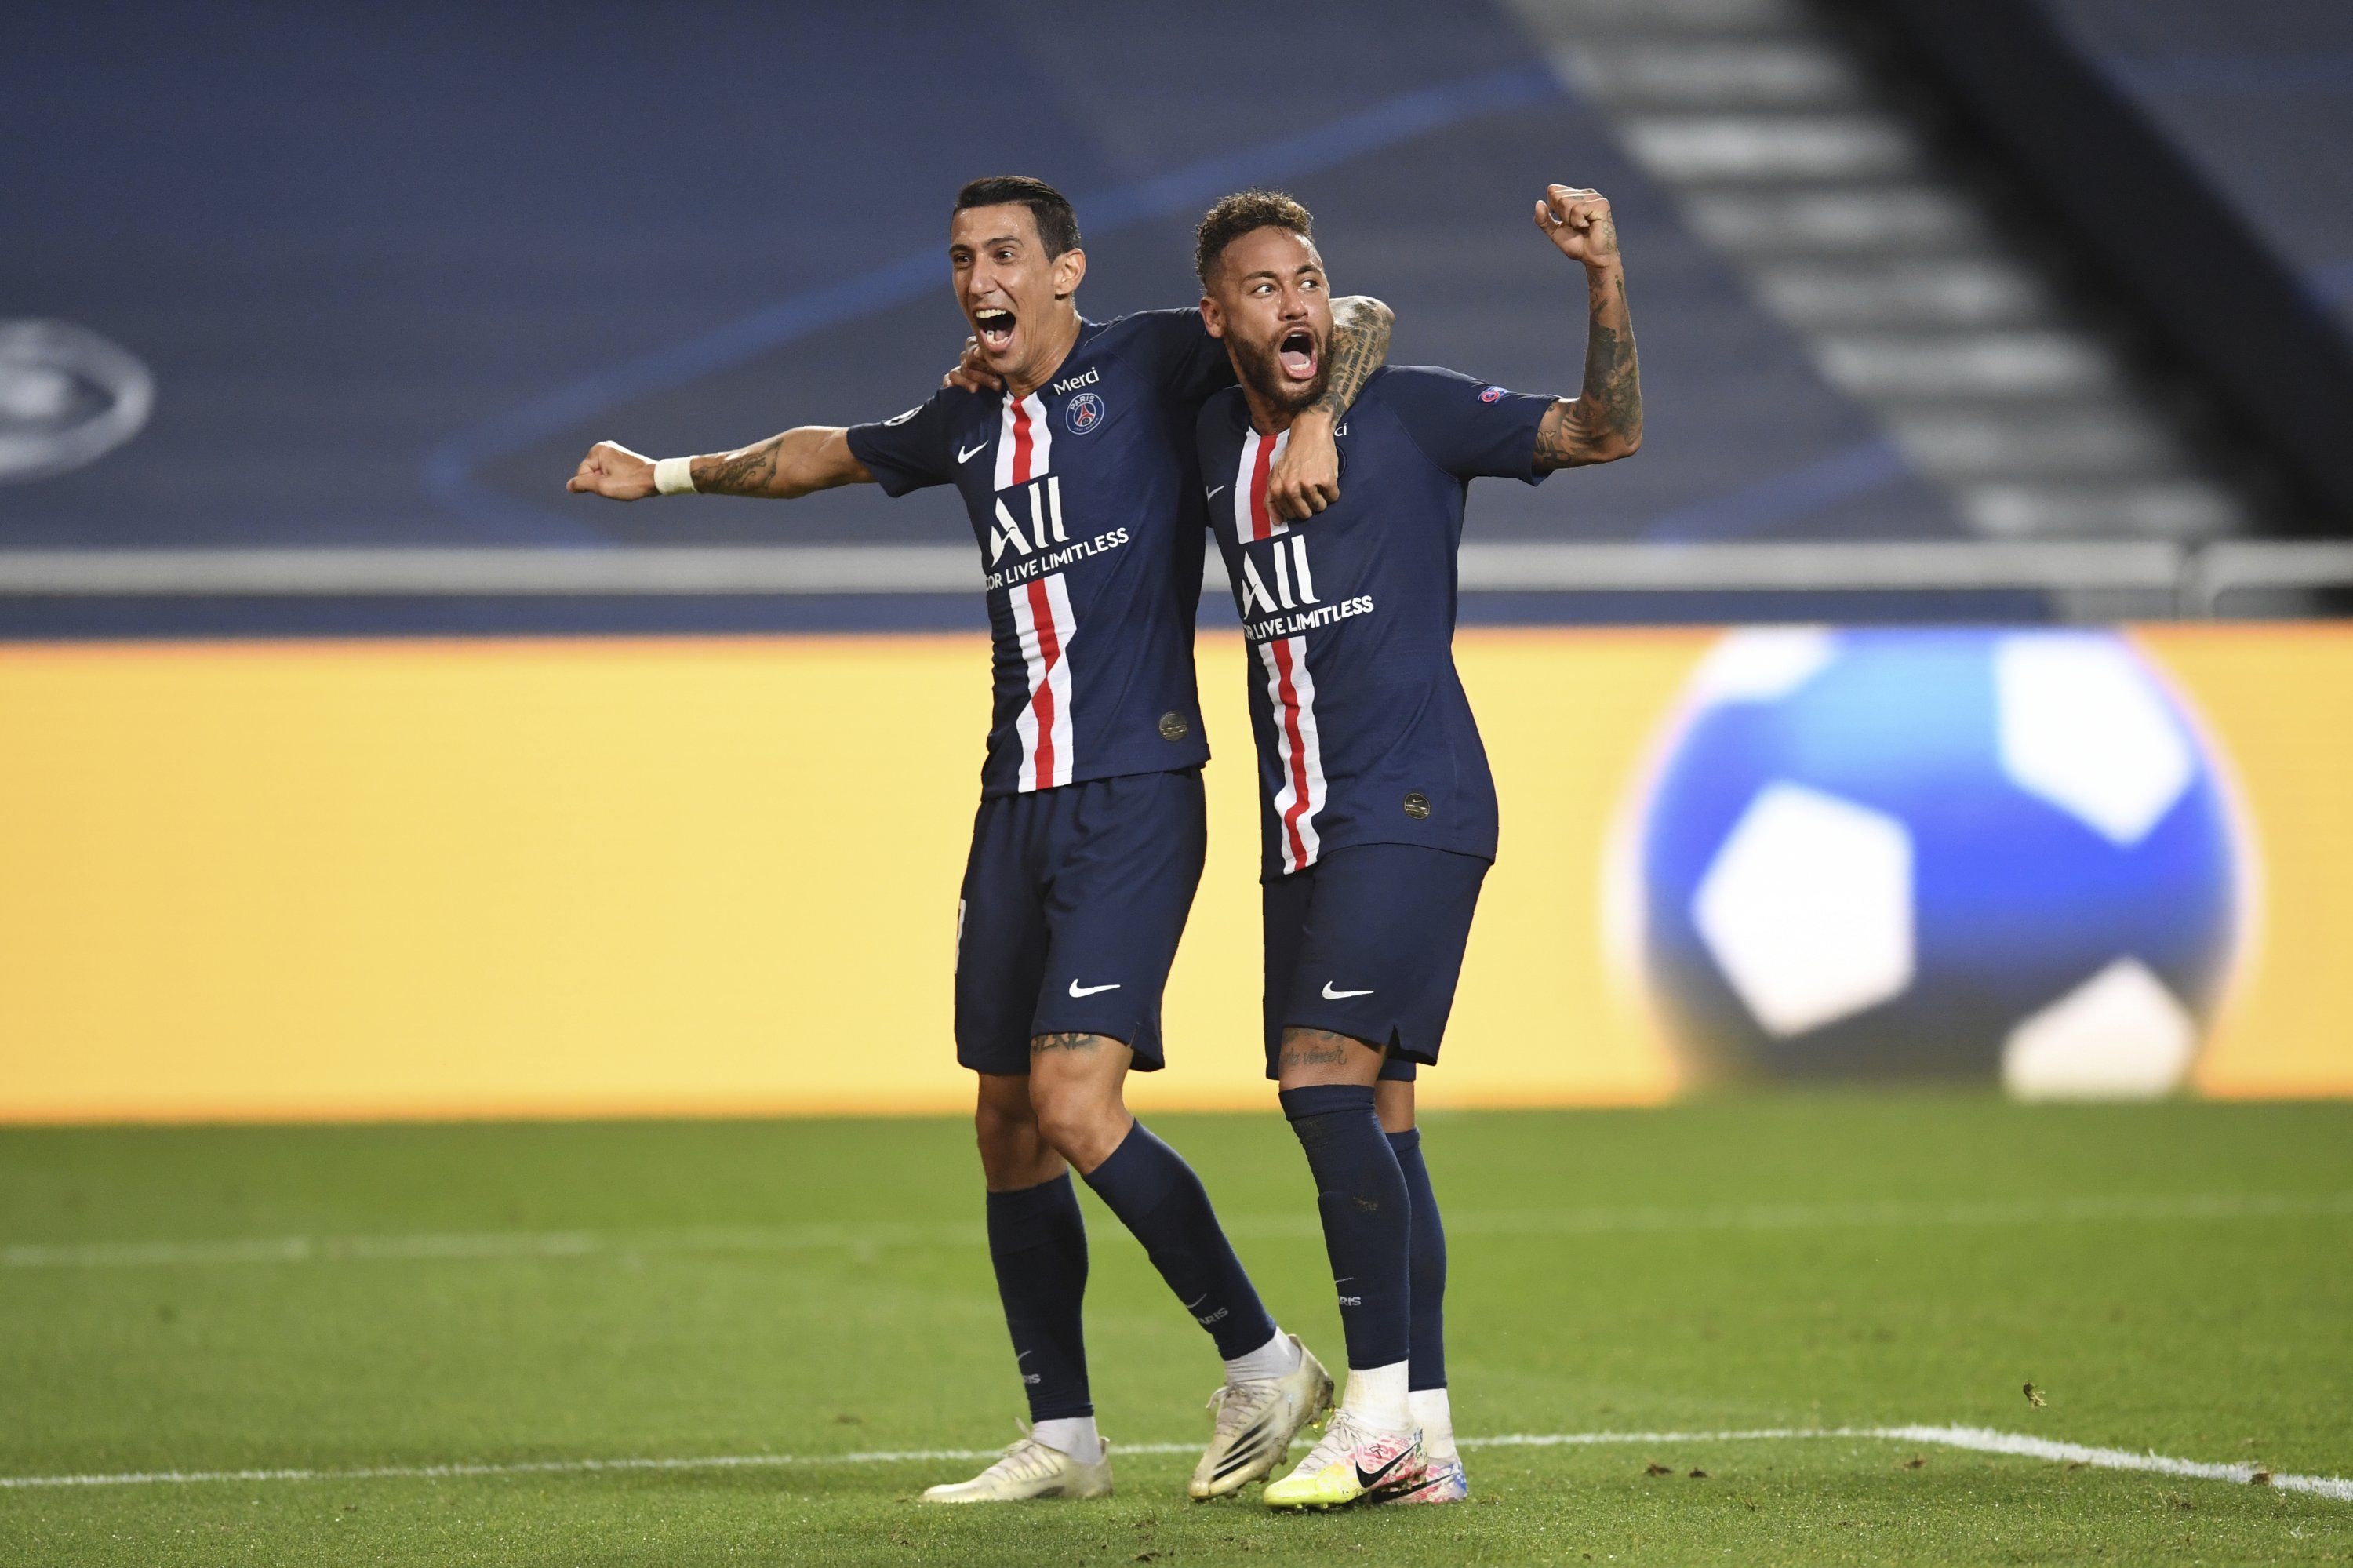 PSG crushes Leipzig to reach 1st Champions League final in club history